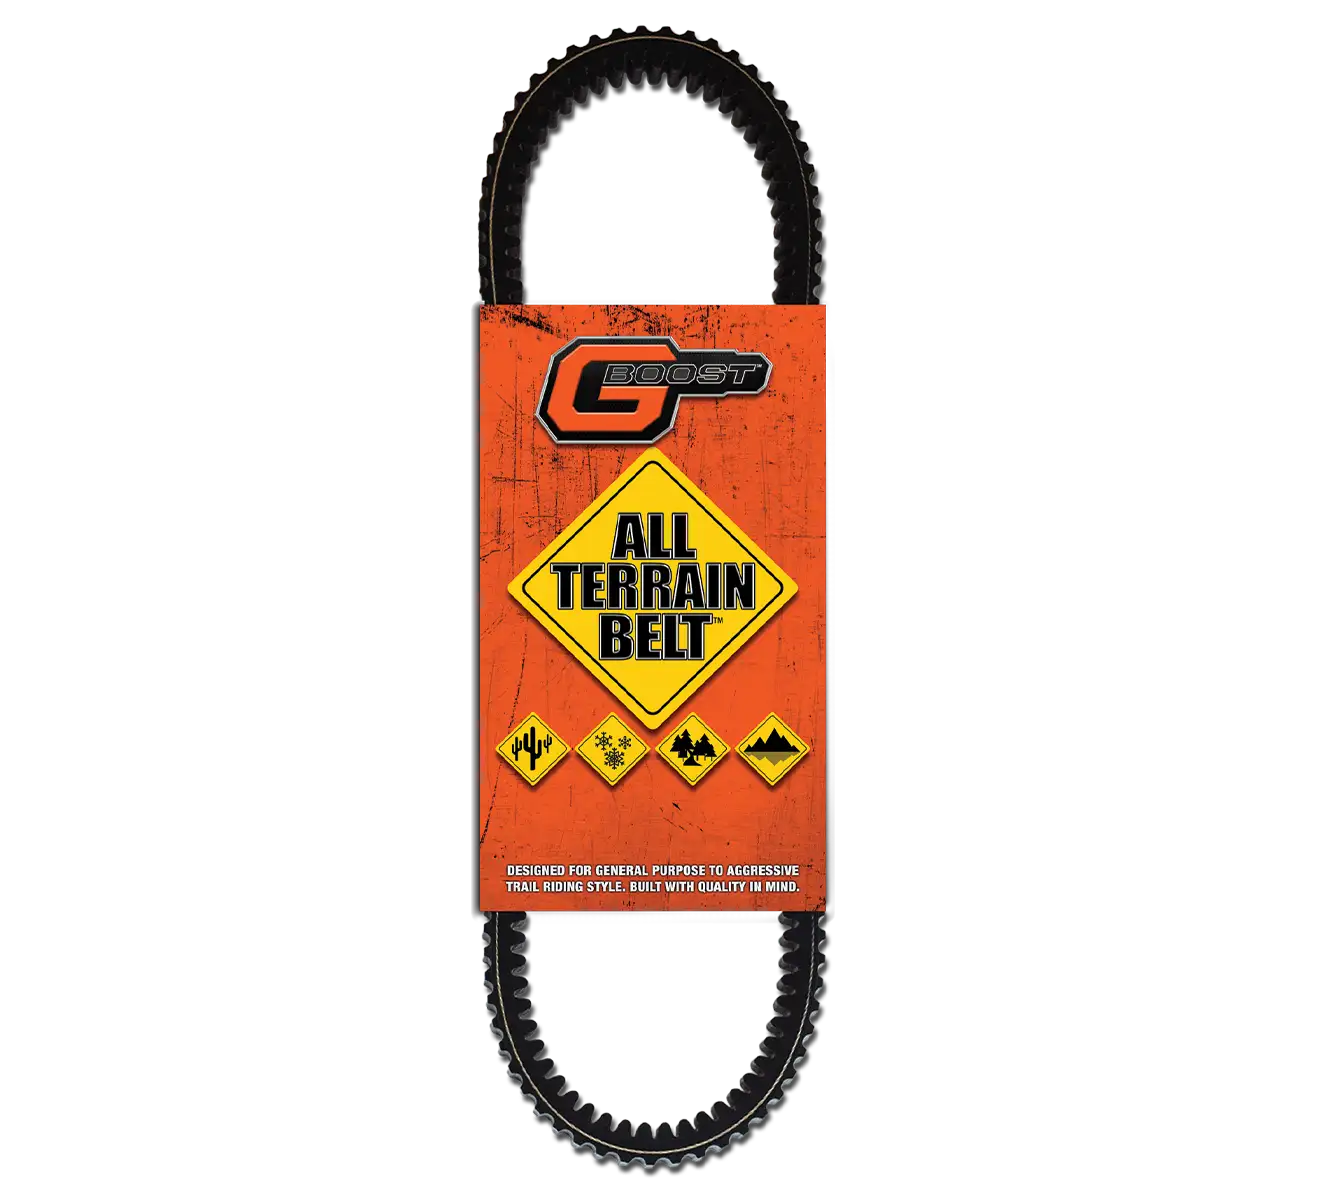 GBoost World's All Terrain Belt for Can Am in Europe Lizardwarehouse